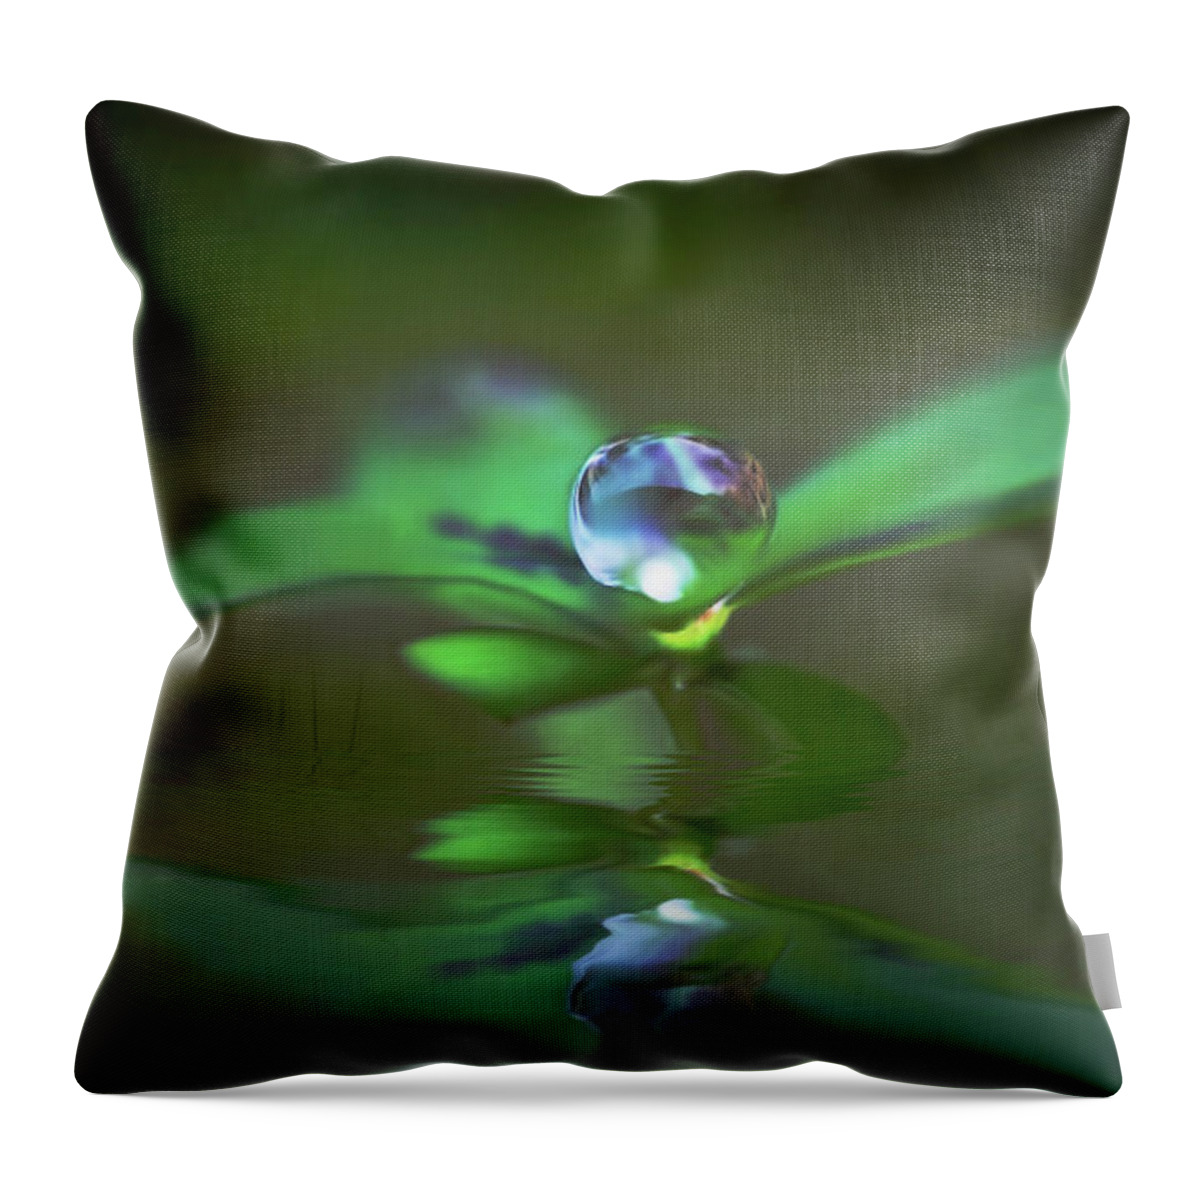 Green Throw Pillow featuring the photograph A Dream Of Green by Kym Clarke